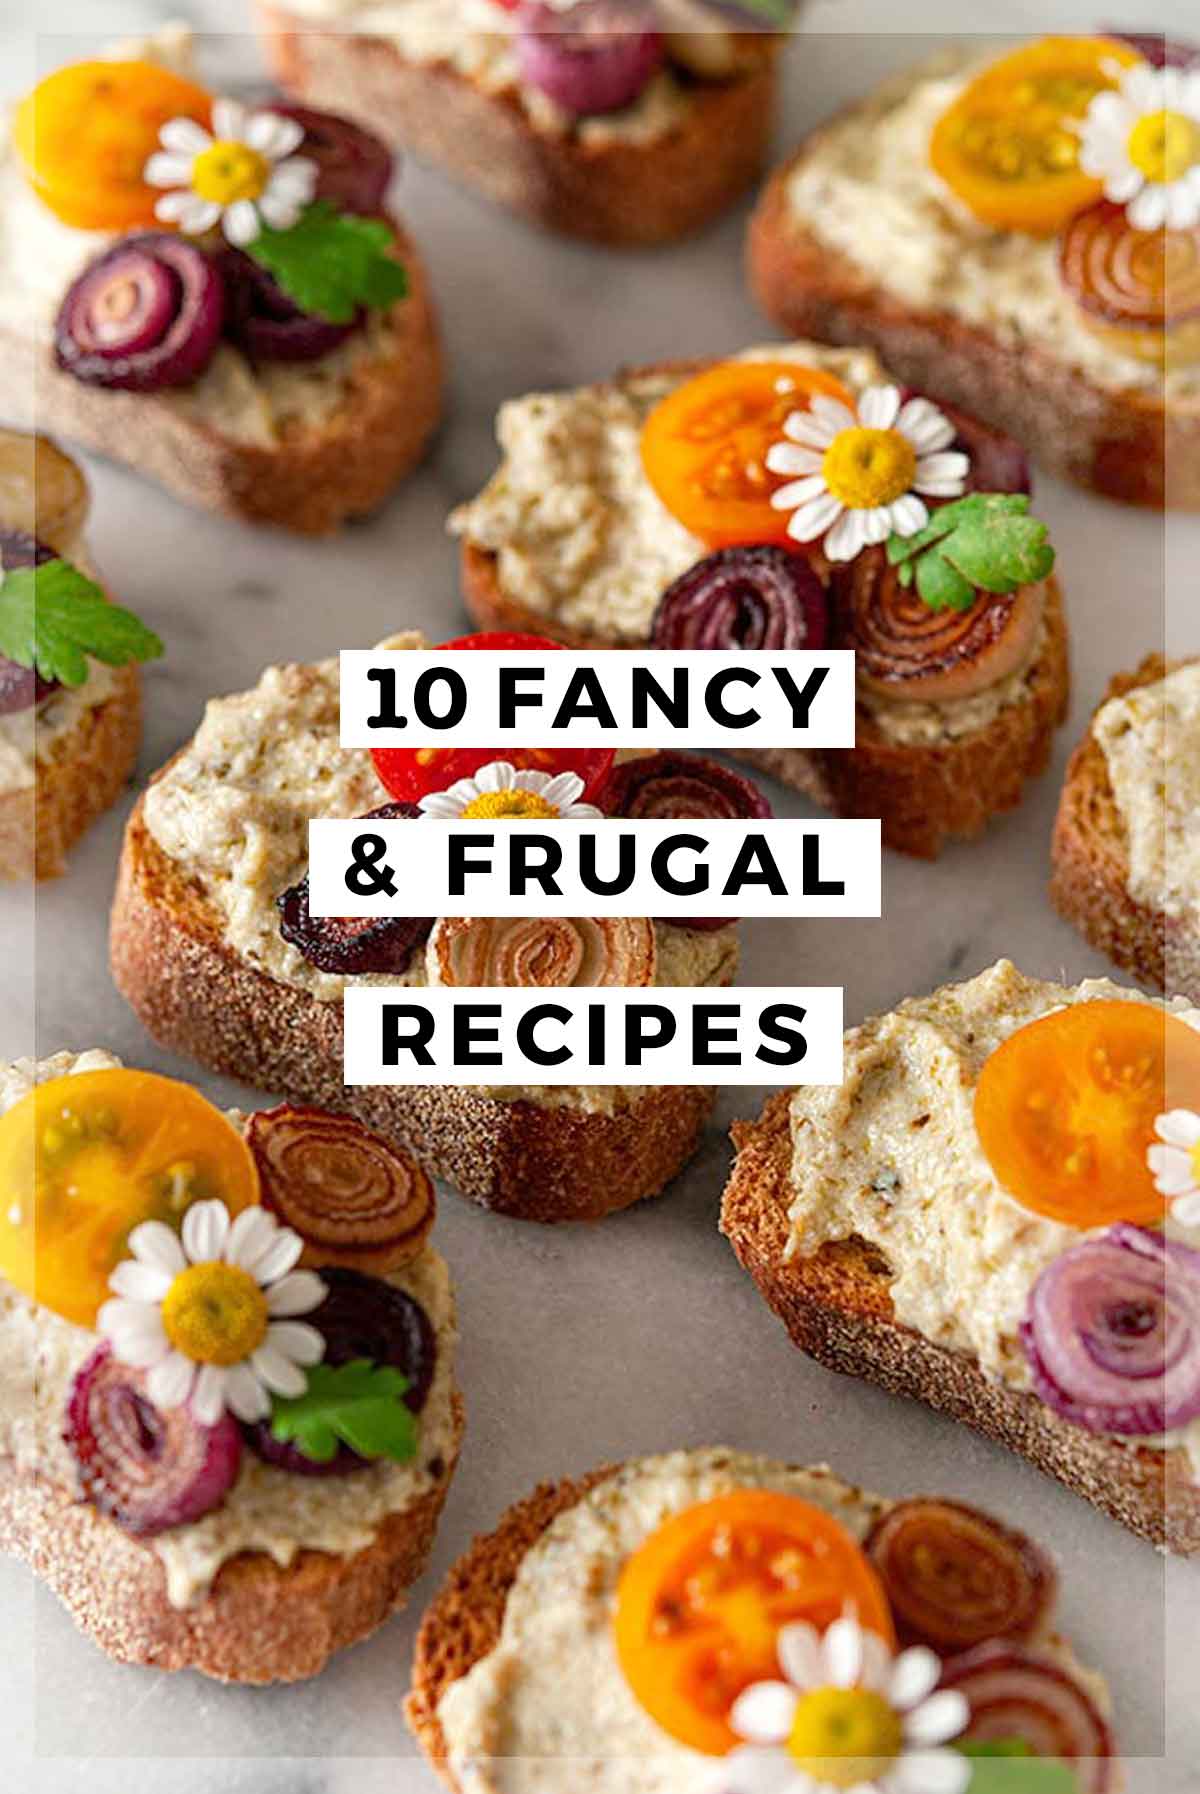 An image of ornately garnished appetizers and a title that says "10 Fancy & Frugal Recipes."